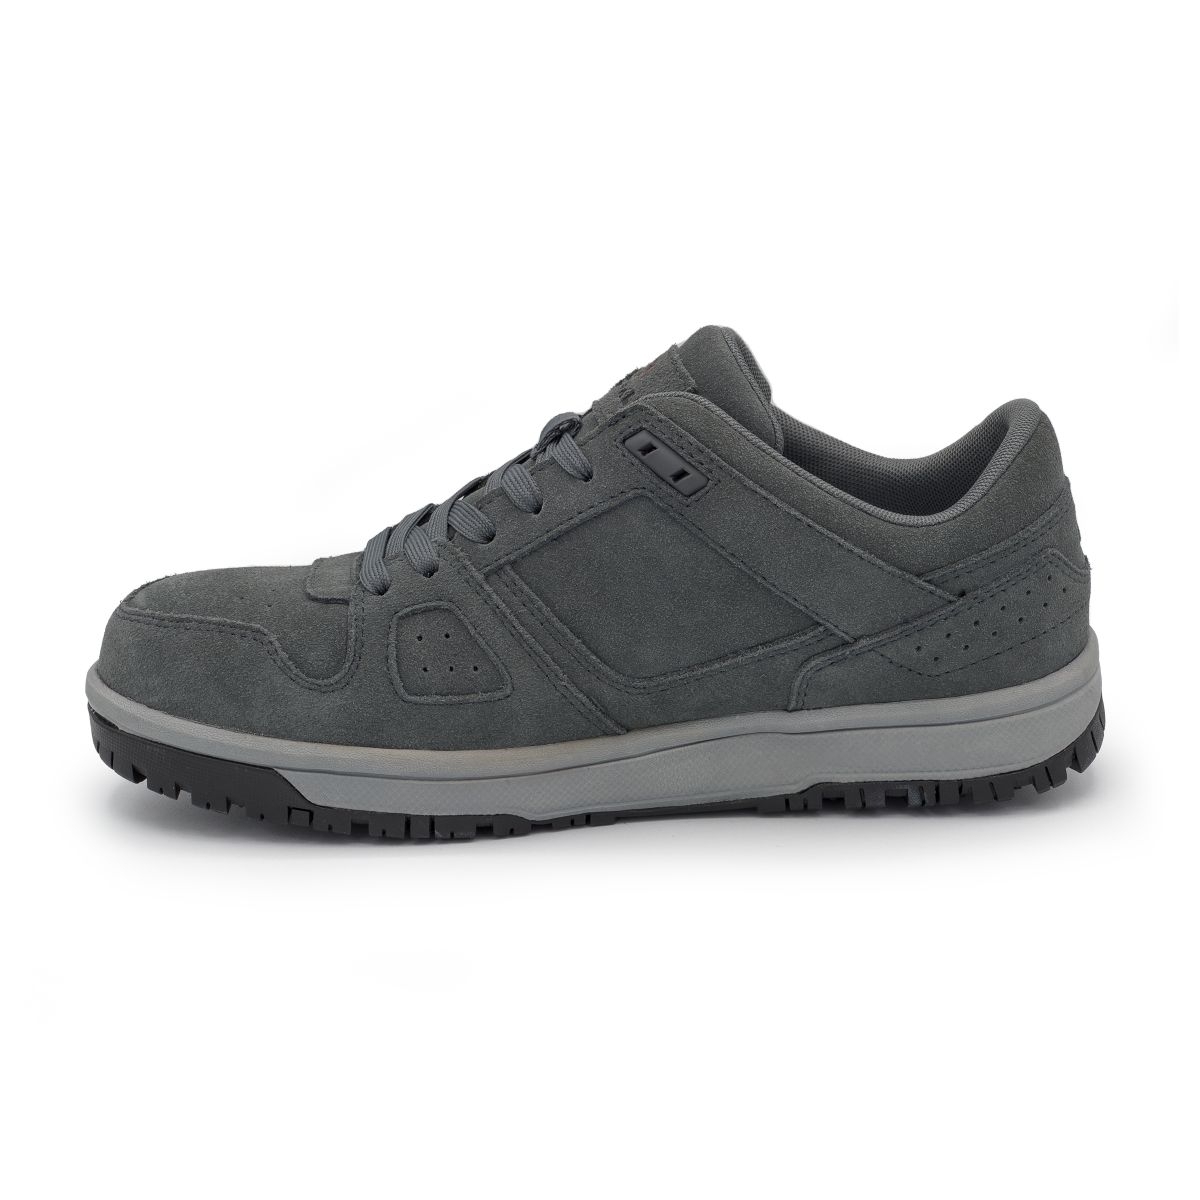 AIRWALK SAFETY Men's Mongo Composite Toe EH Work Shoe Charcoal/Grey - AW6301 CHARCOAL/GRAY - CHARCOAL/GRAY, 7-M